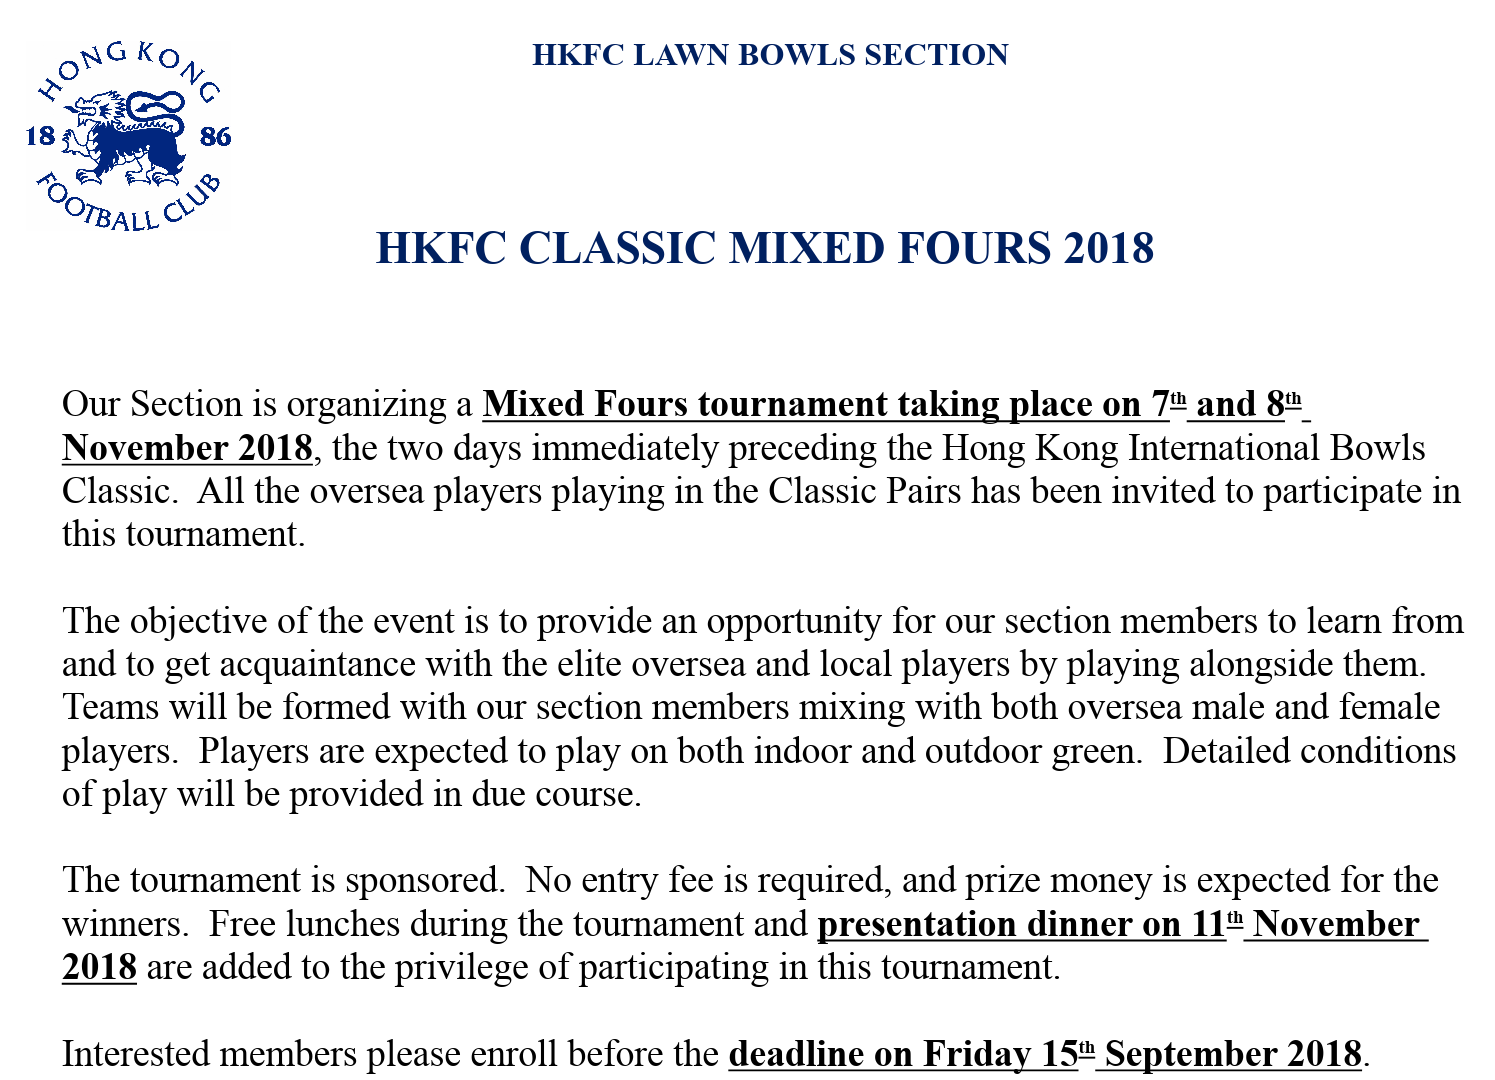 HKFC Classic Mixed Fours - Entries for Selection